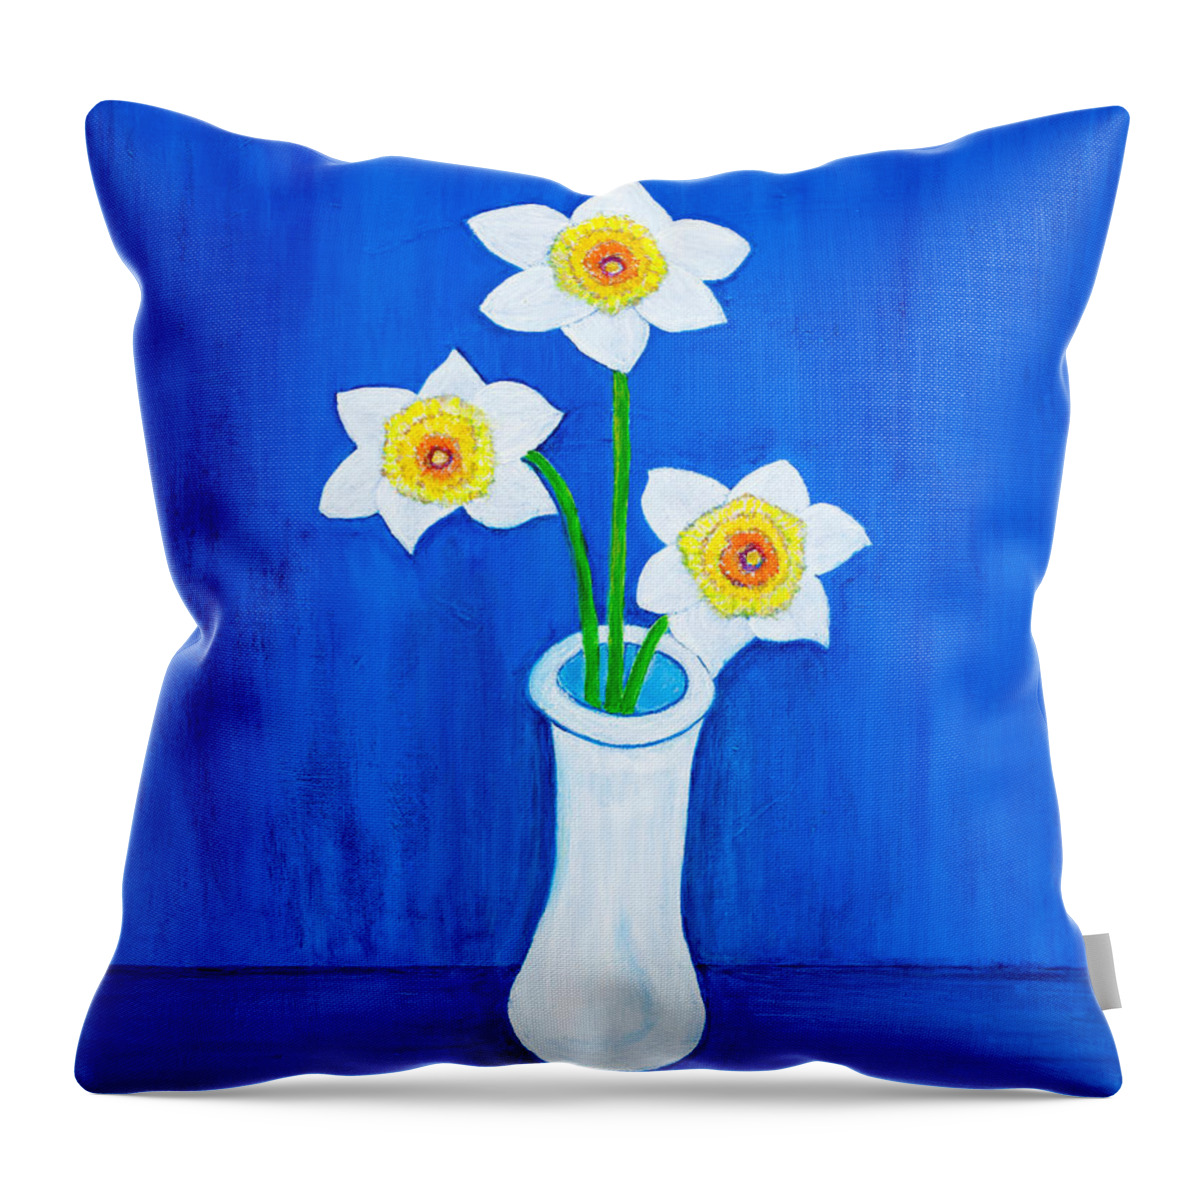 Daffodils Throw Pillow featuring the painting Daffodils on Blue by Santana Star